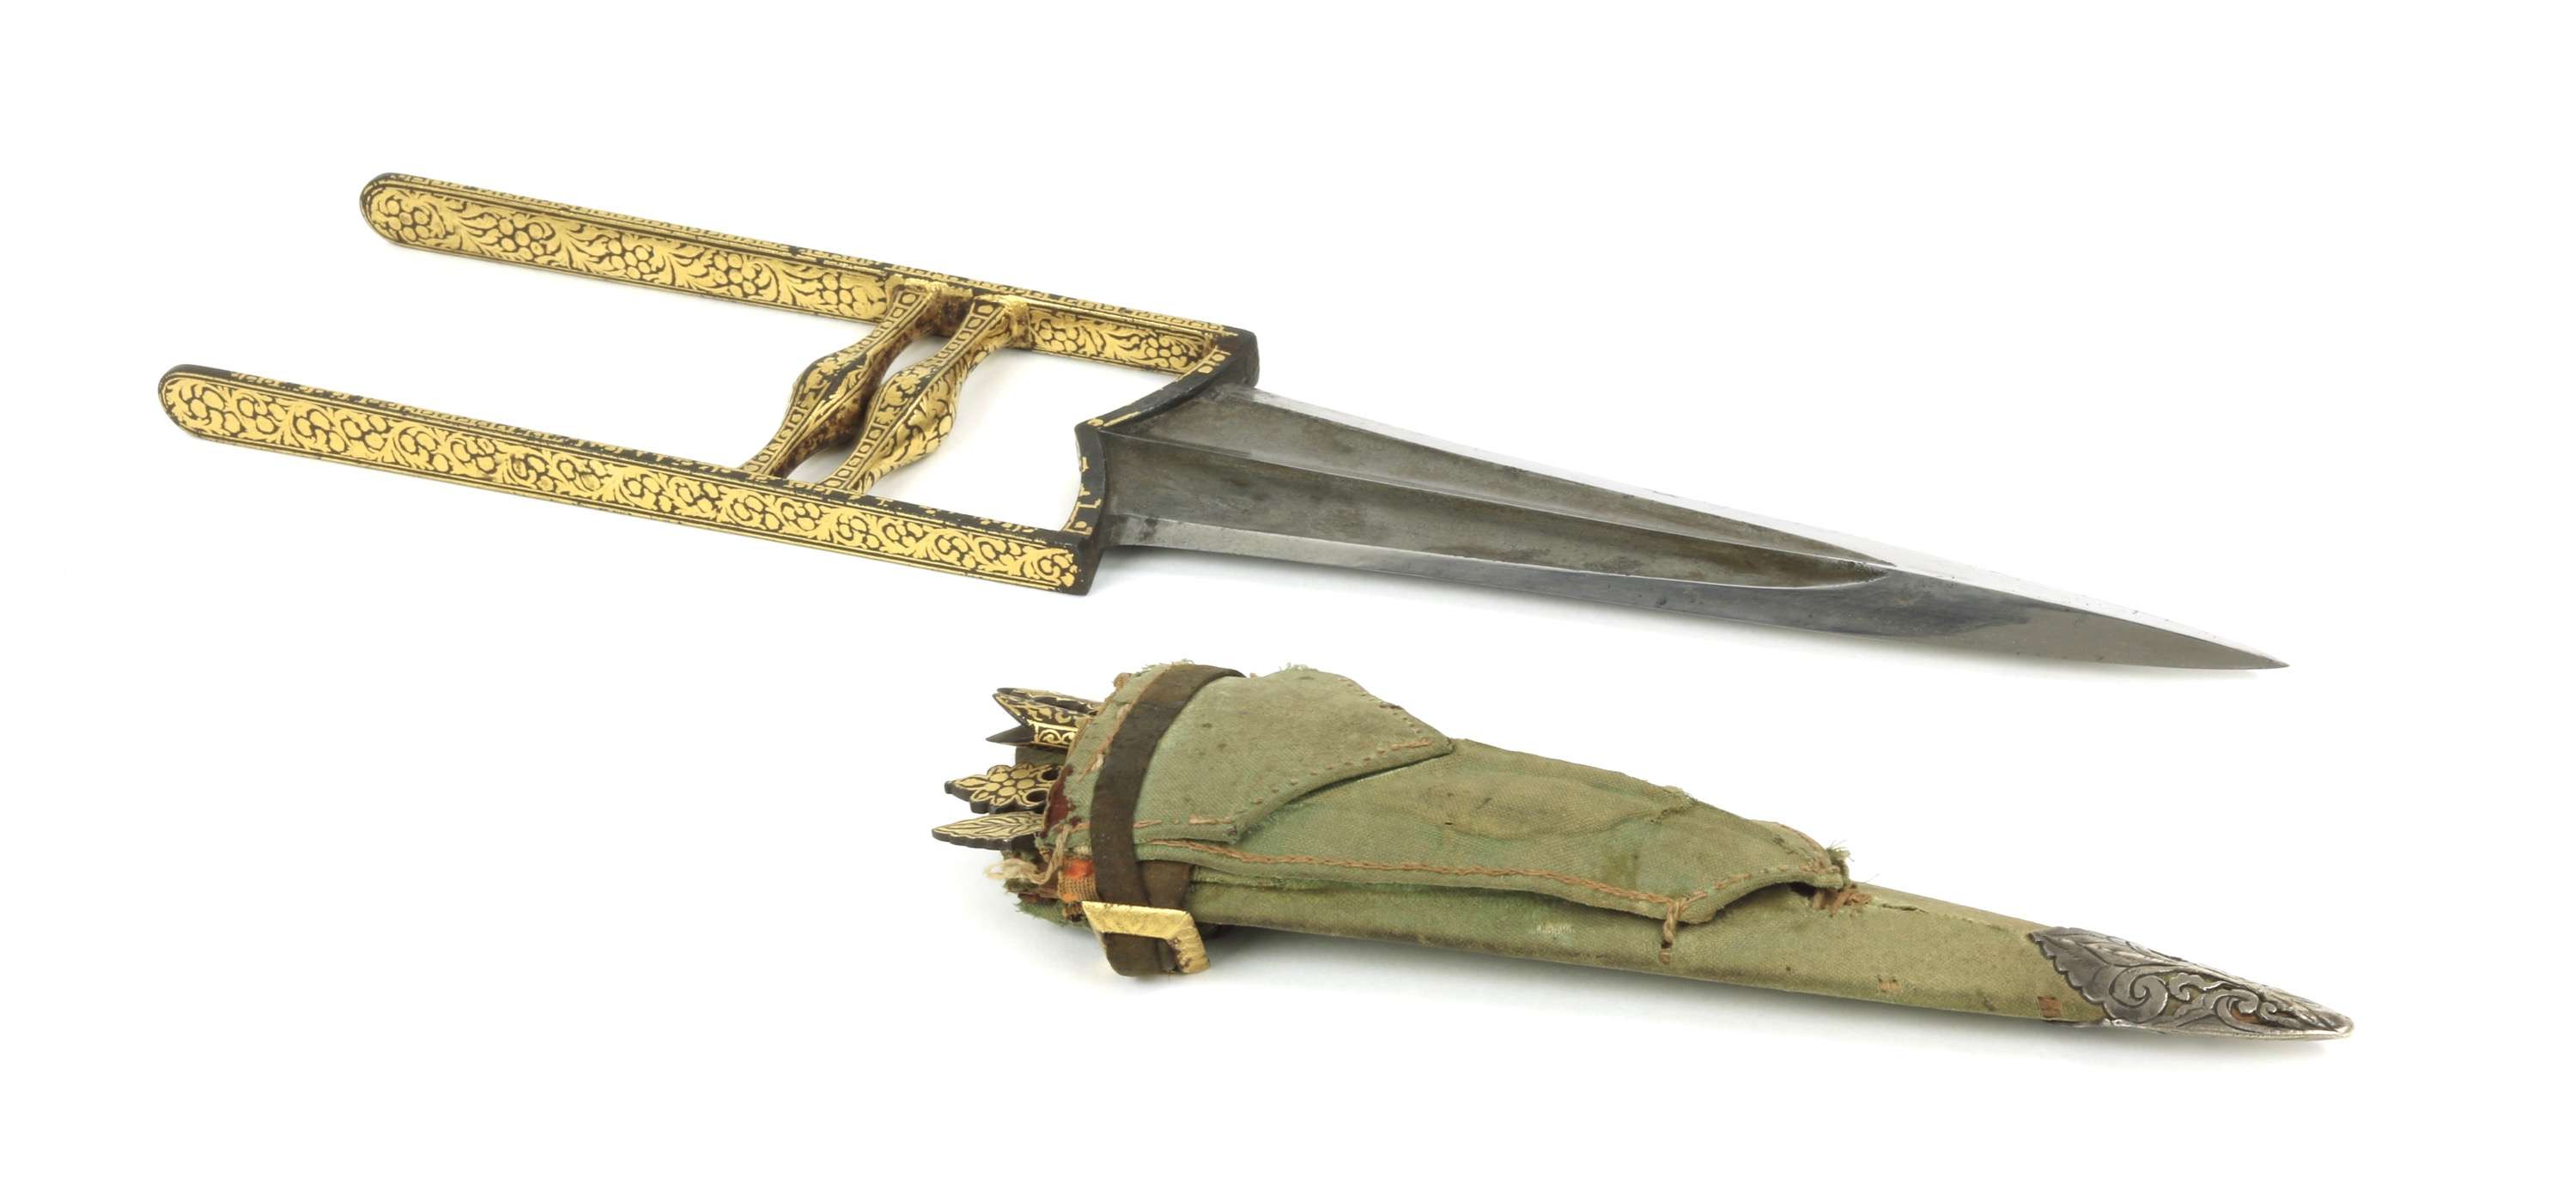 North Indian katar with tools